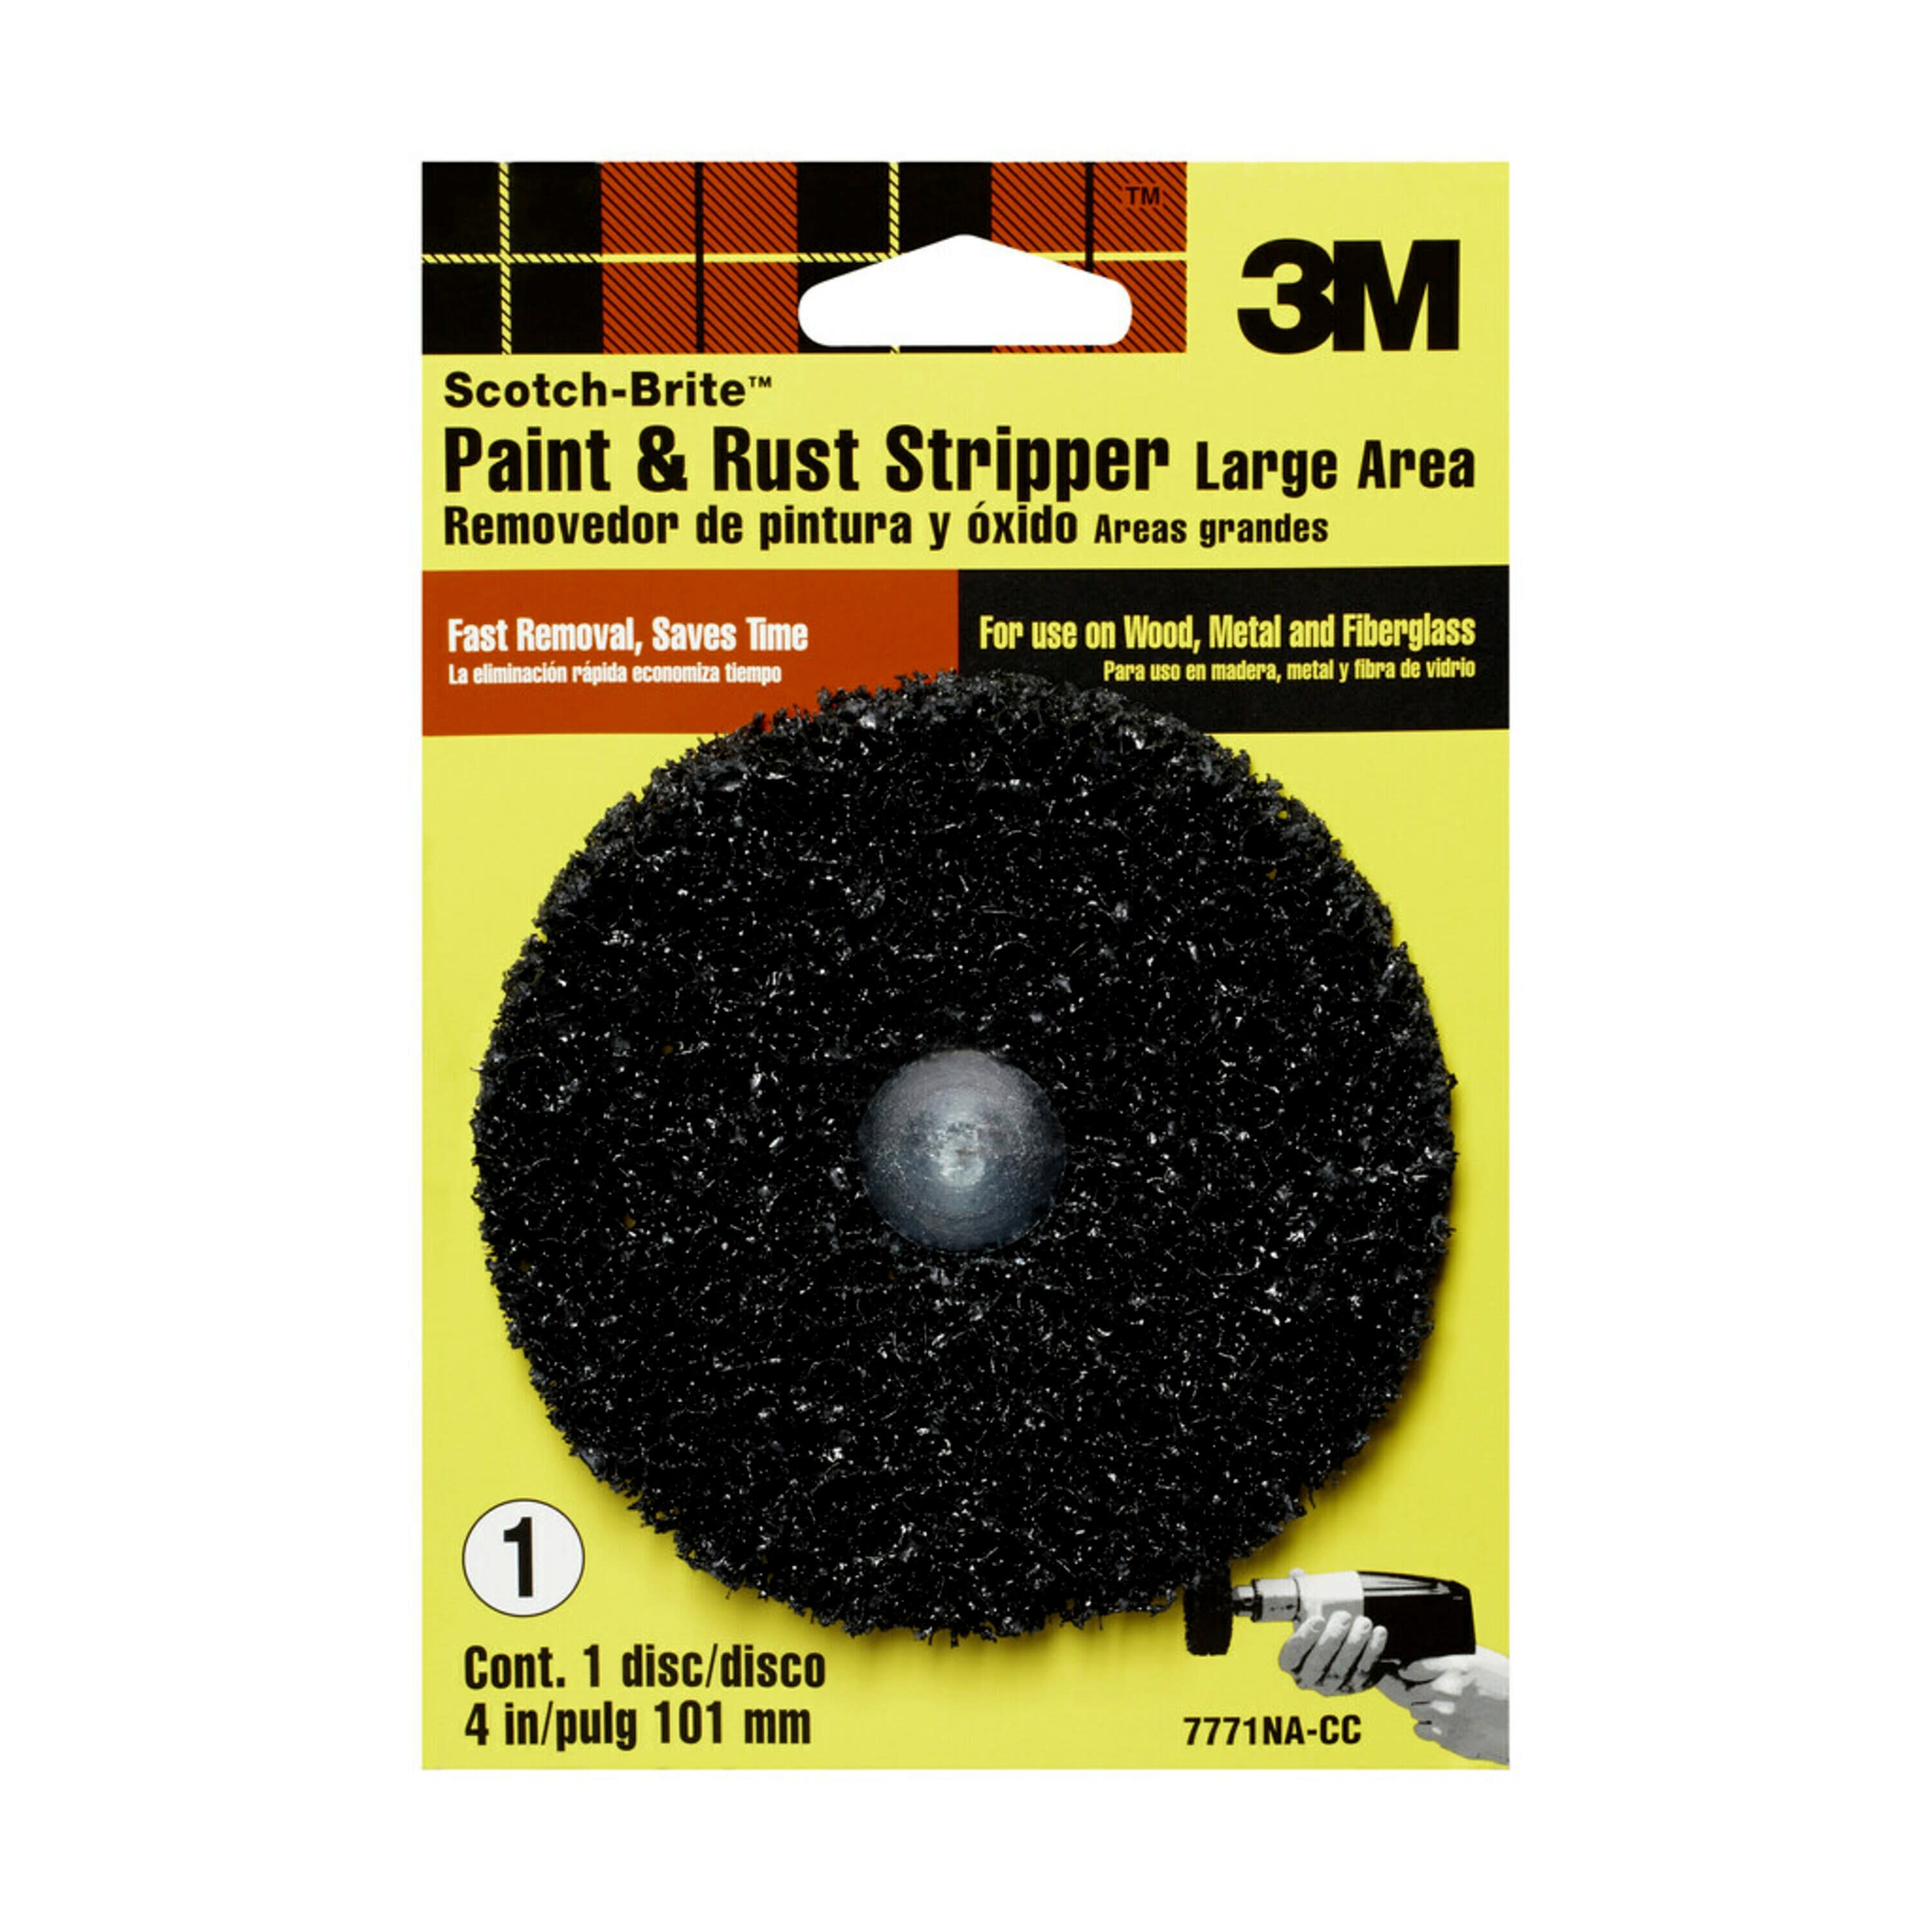 3M Paint and Rust Stripper, 4 in. Diameter, 1 Disc/Pack - image 1 of 4